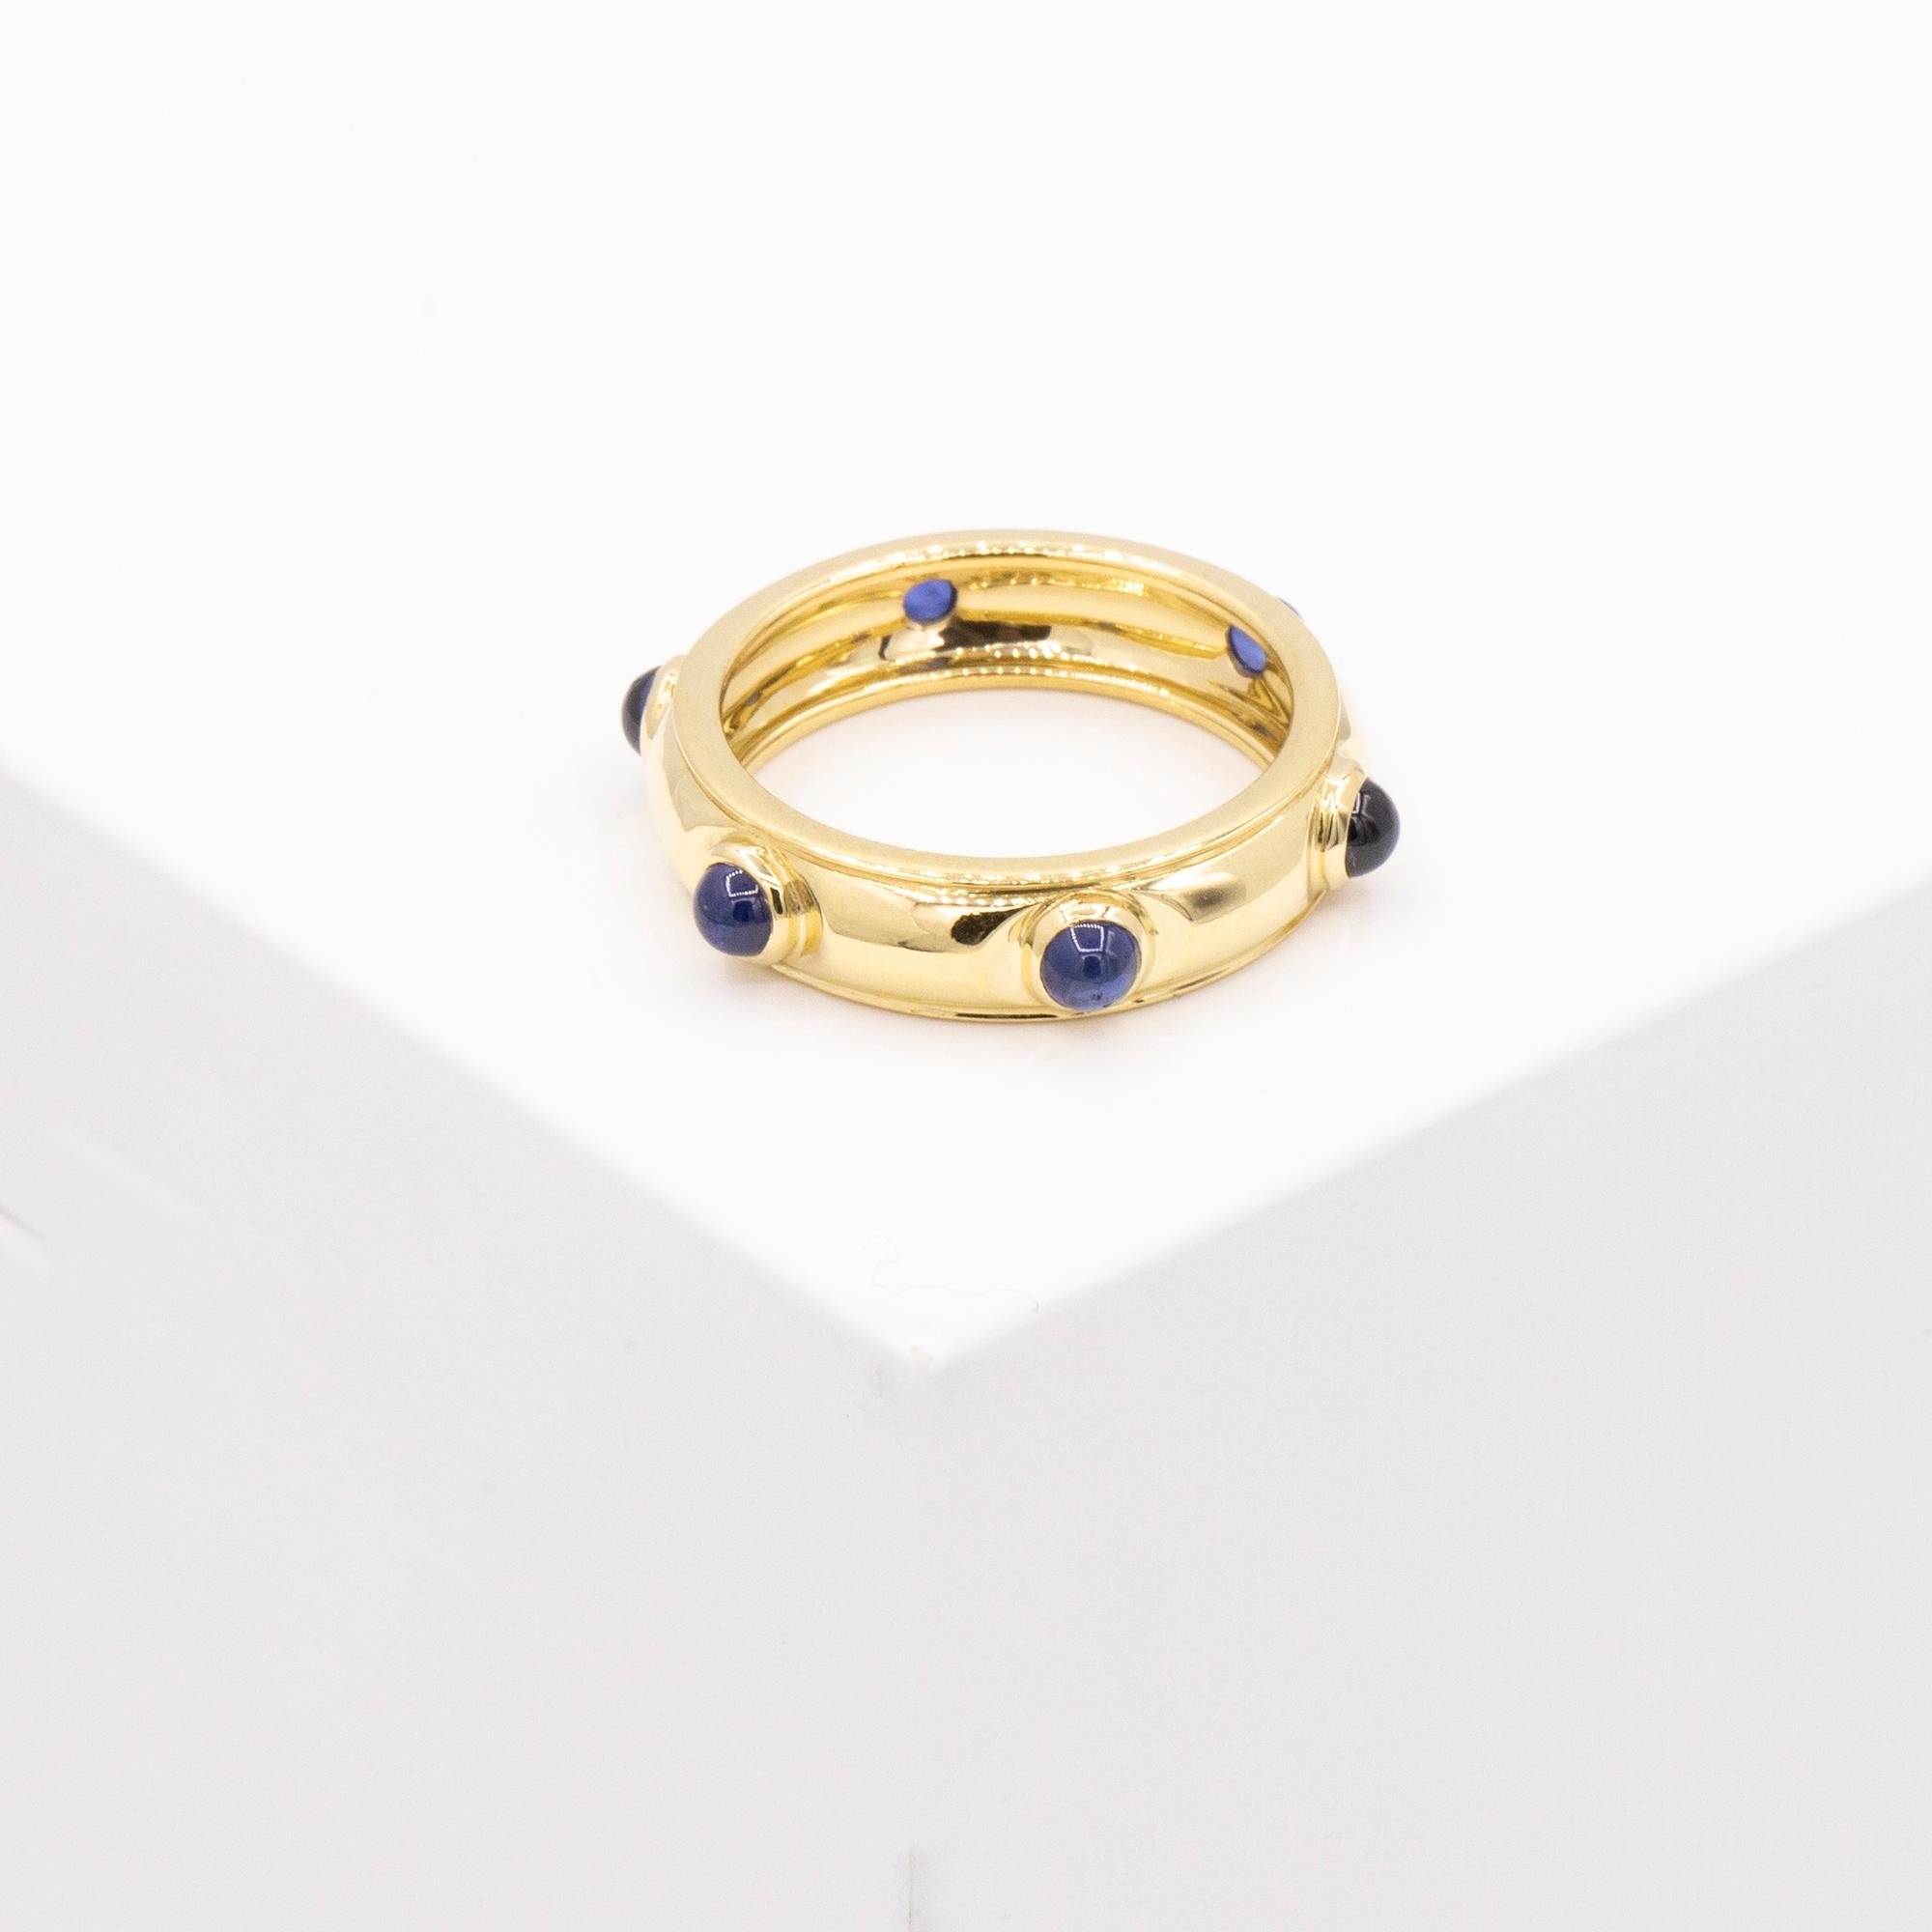 18kt Yellow Gold band stamped Tiffany & Co. Size 6. CIRCA 1980s. There are 6 Cabochon sapphires weighing 3.35 dwt in total.